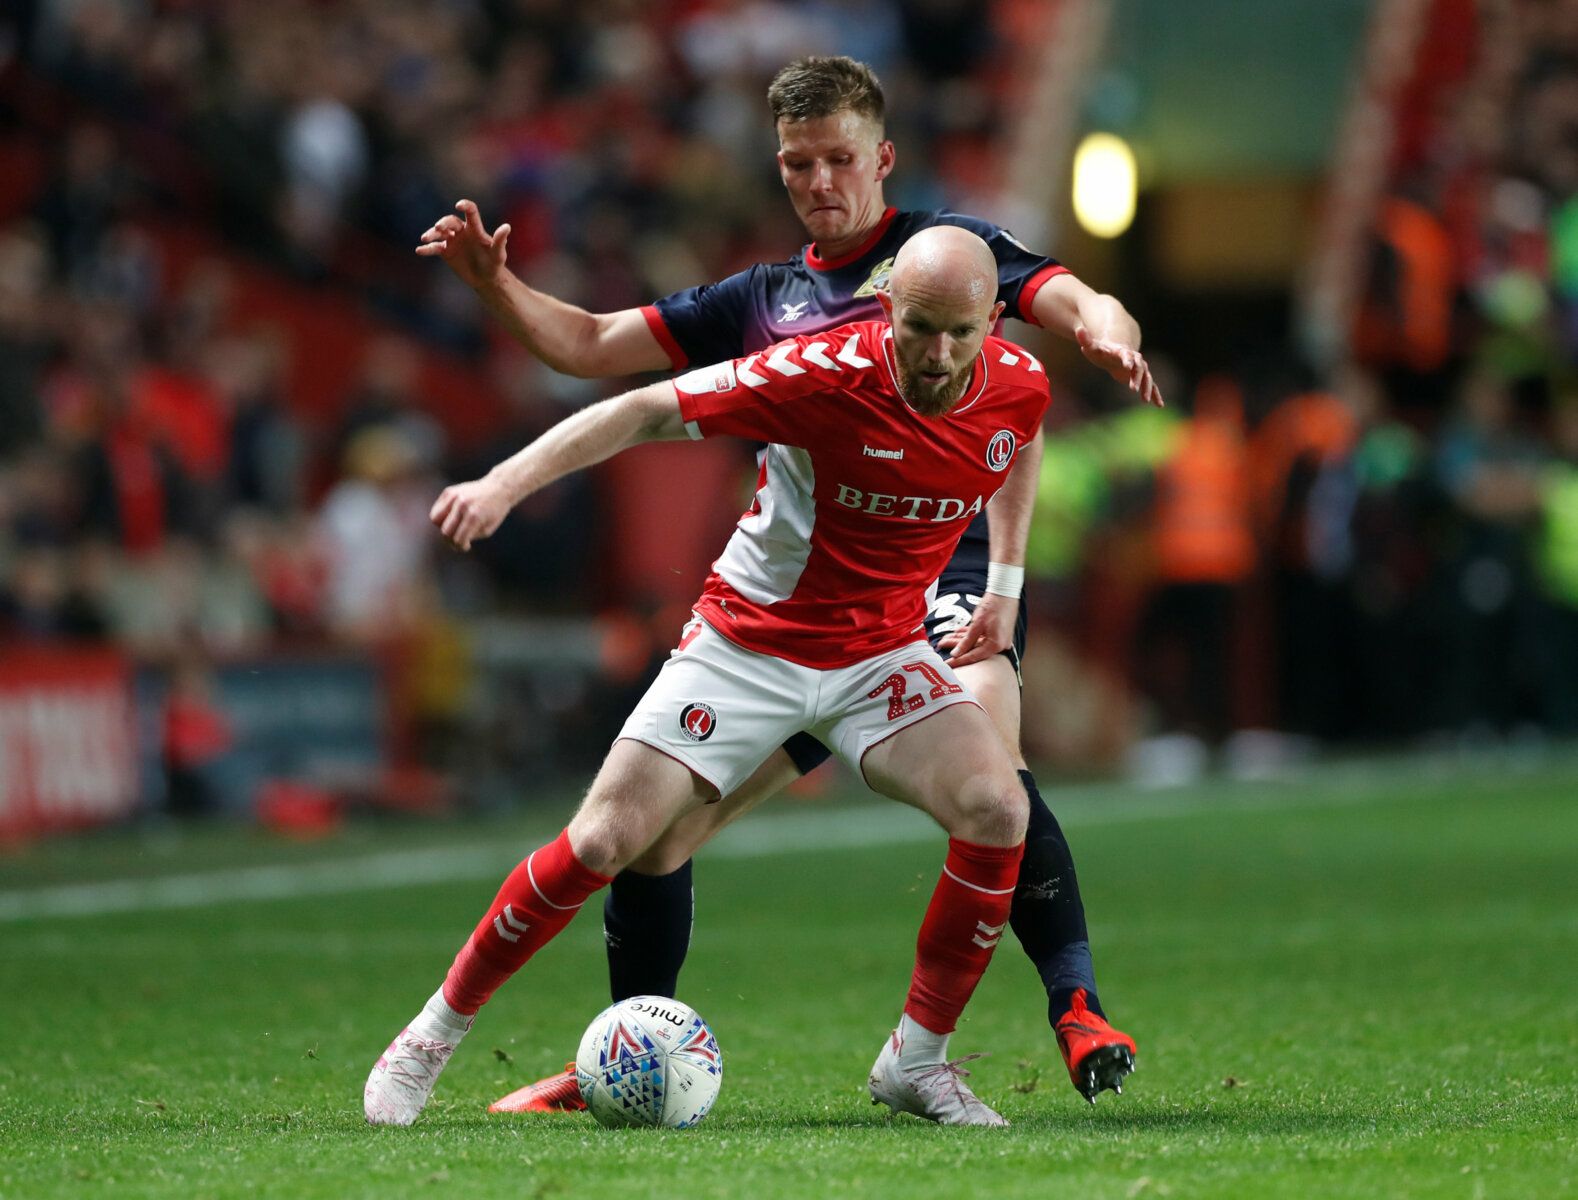 Soccer Football - League One Play-Off Semi Final Second Leg - Charlton Athletic v Doncaster Rovers - The Valley, London, Britain - May 17, 2019   Charlton's Jonny Williams in action with Doncaster's Paul Downing   Action Images/Paul Childs    EDITORIAL USE ONLY. No use with unauthorized audio, video, data, fixture lists, club/league logos or "live" services. Online in-match use limited to 75 images, no video emulation. No use in betting, games or single club/league/player publications.  Please c